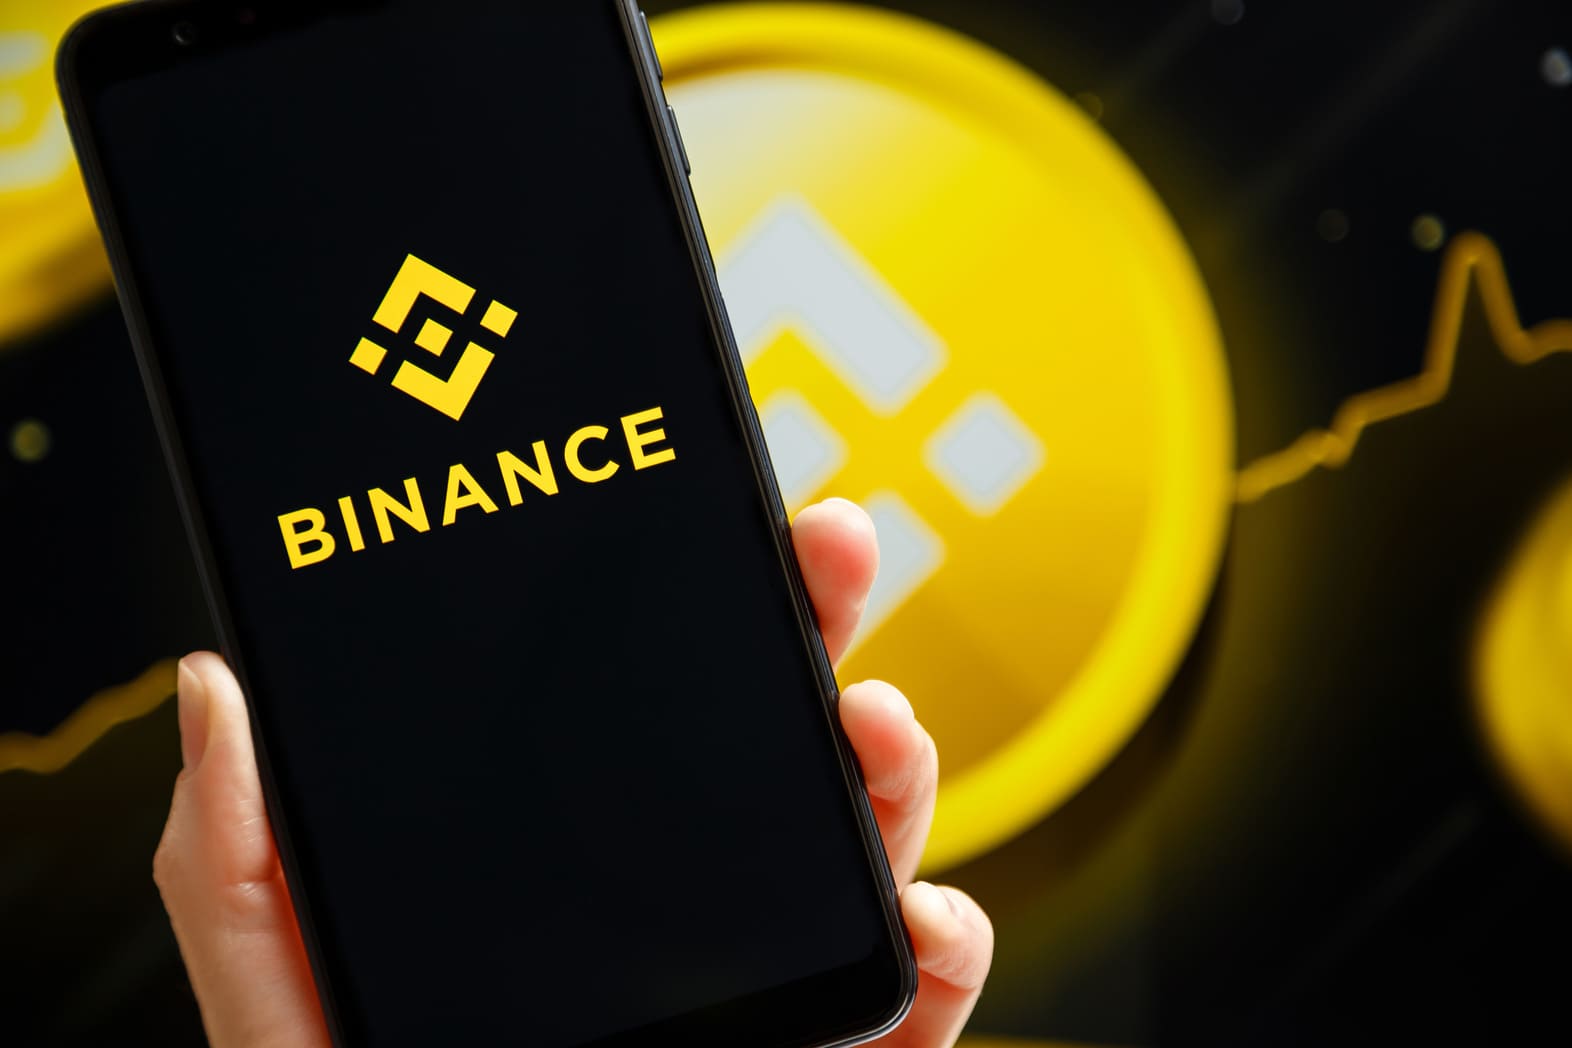 Binance Launches Ethereum Staking with a 6% APY